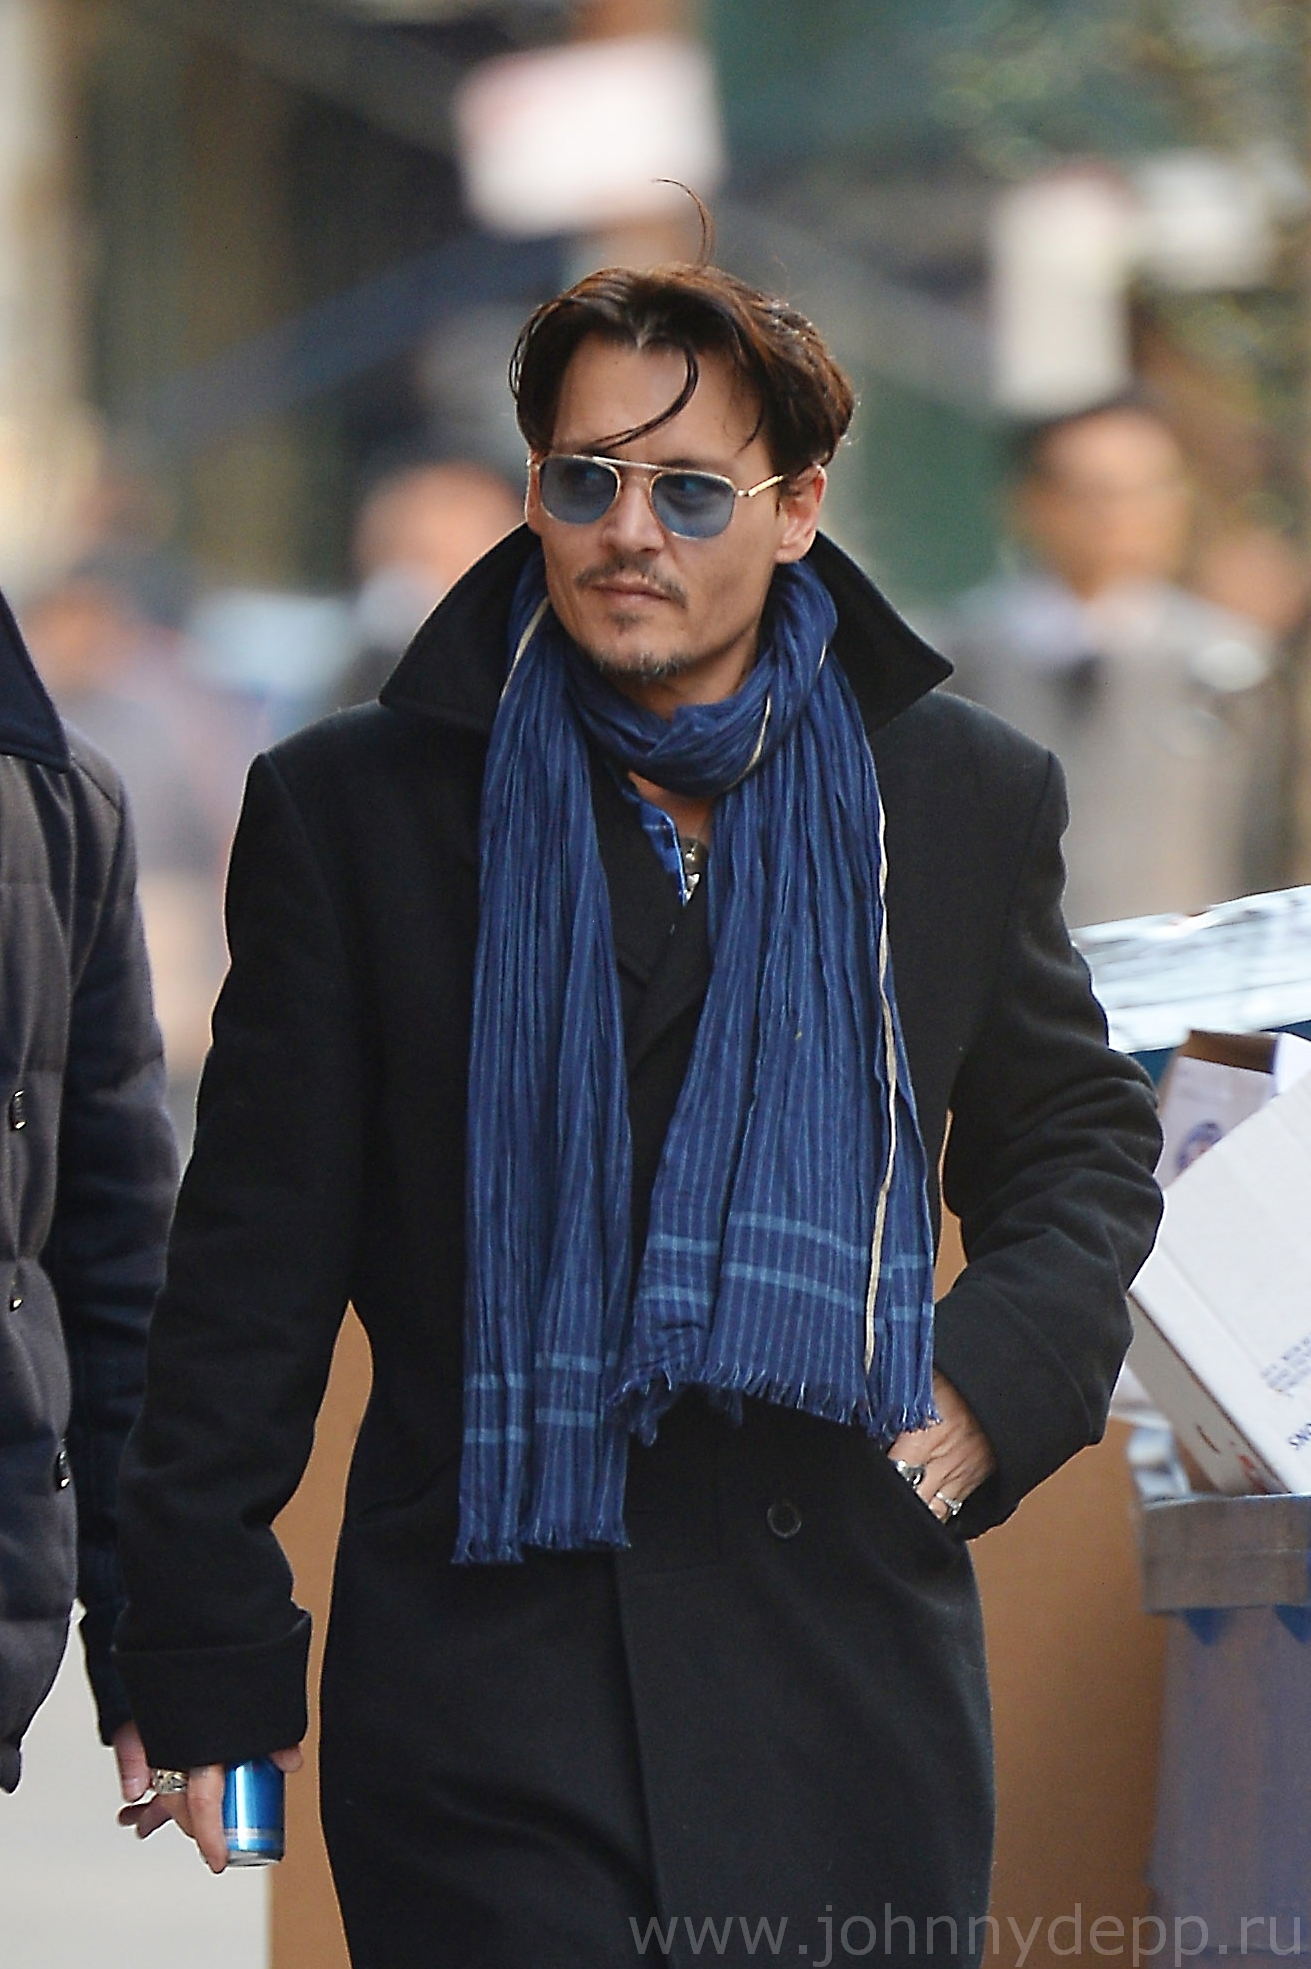 Johnny Depp is the Leading Man in Amber Heard’s Life! | Amber Heard, Johnny Depp ...1311 x 1969